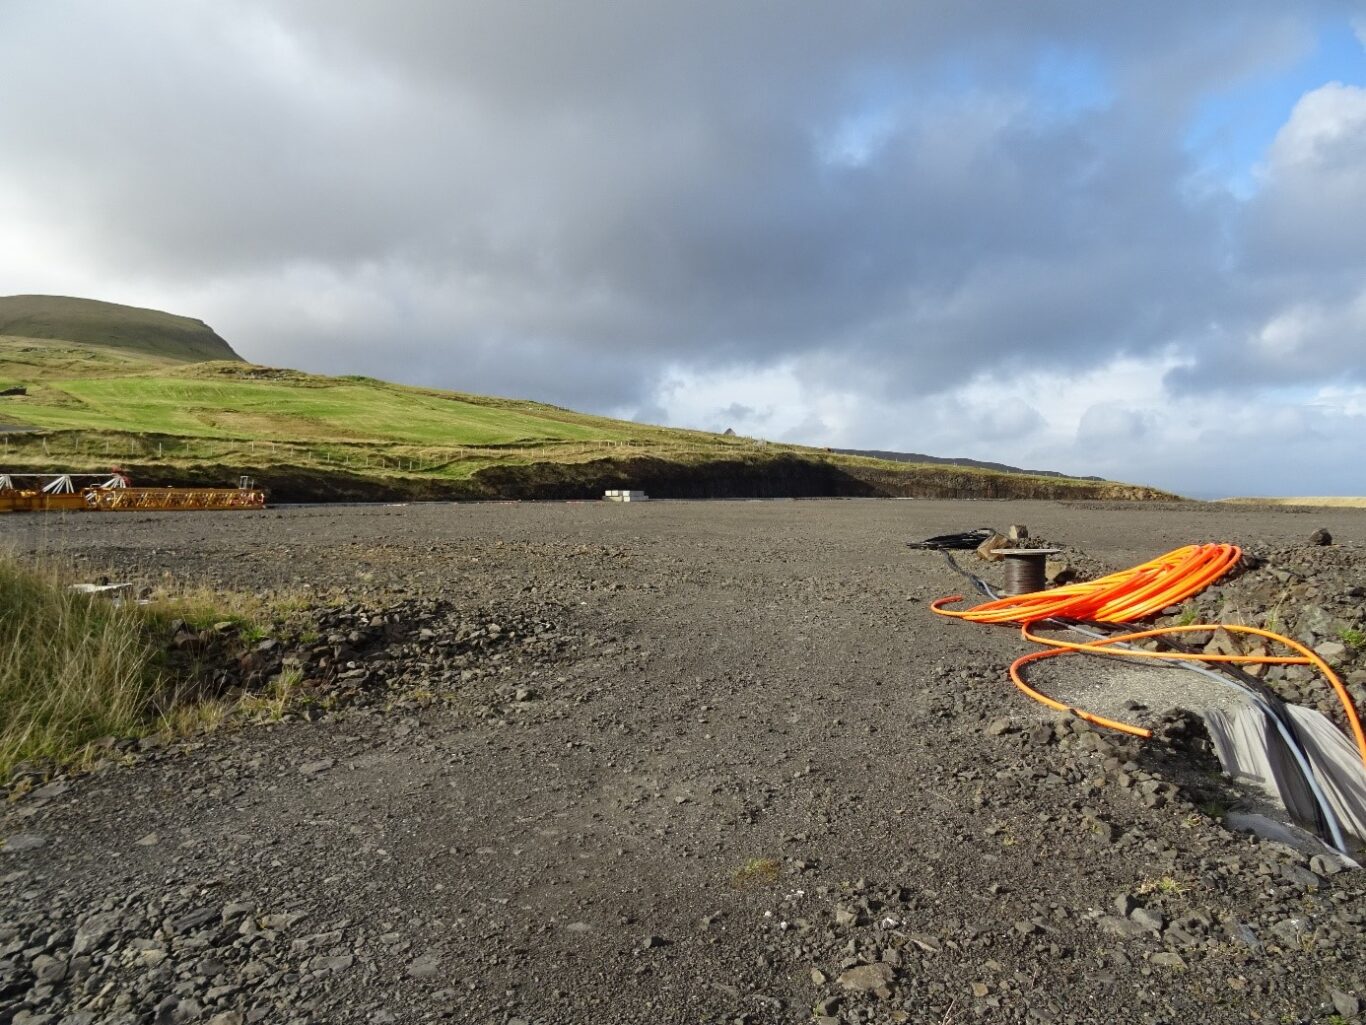 The construction site of Bakkafrost’s salmon farm in Skalavík seems to be on hold. Photo by Alexis Sancho-Reinoso.